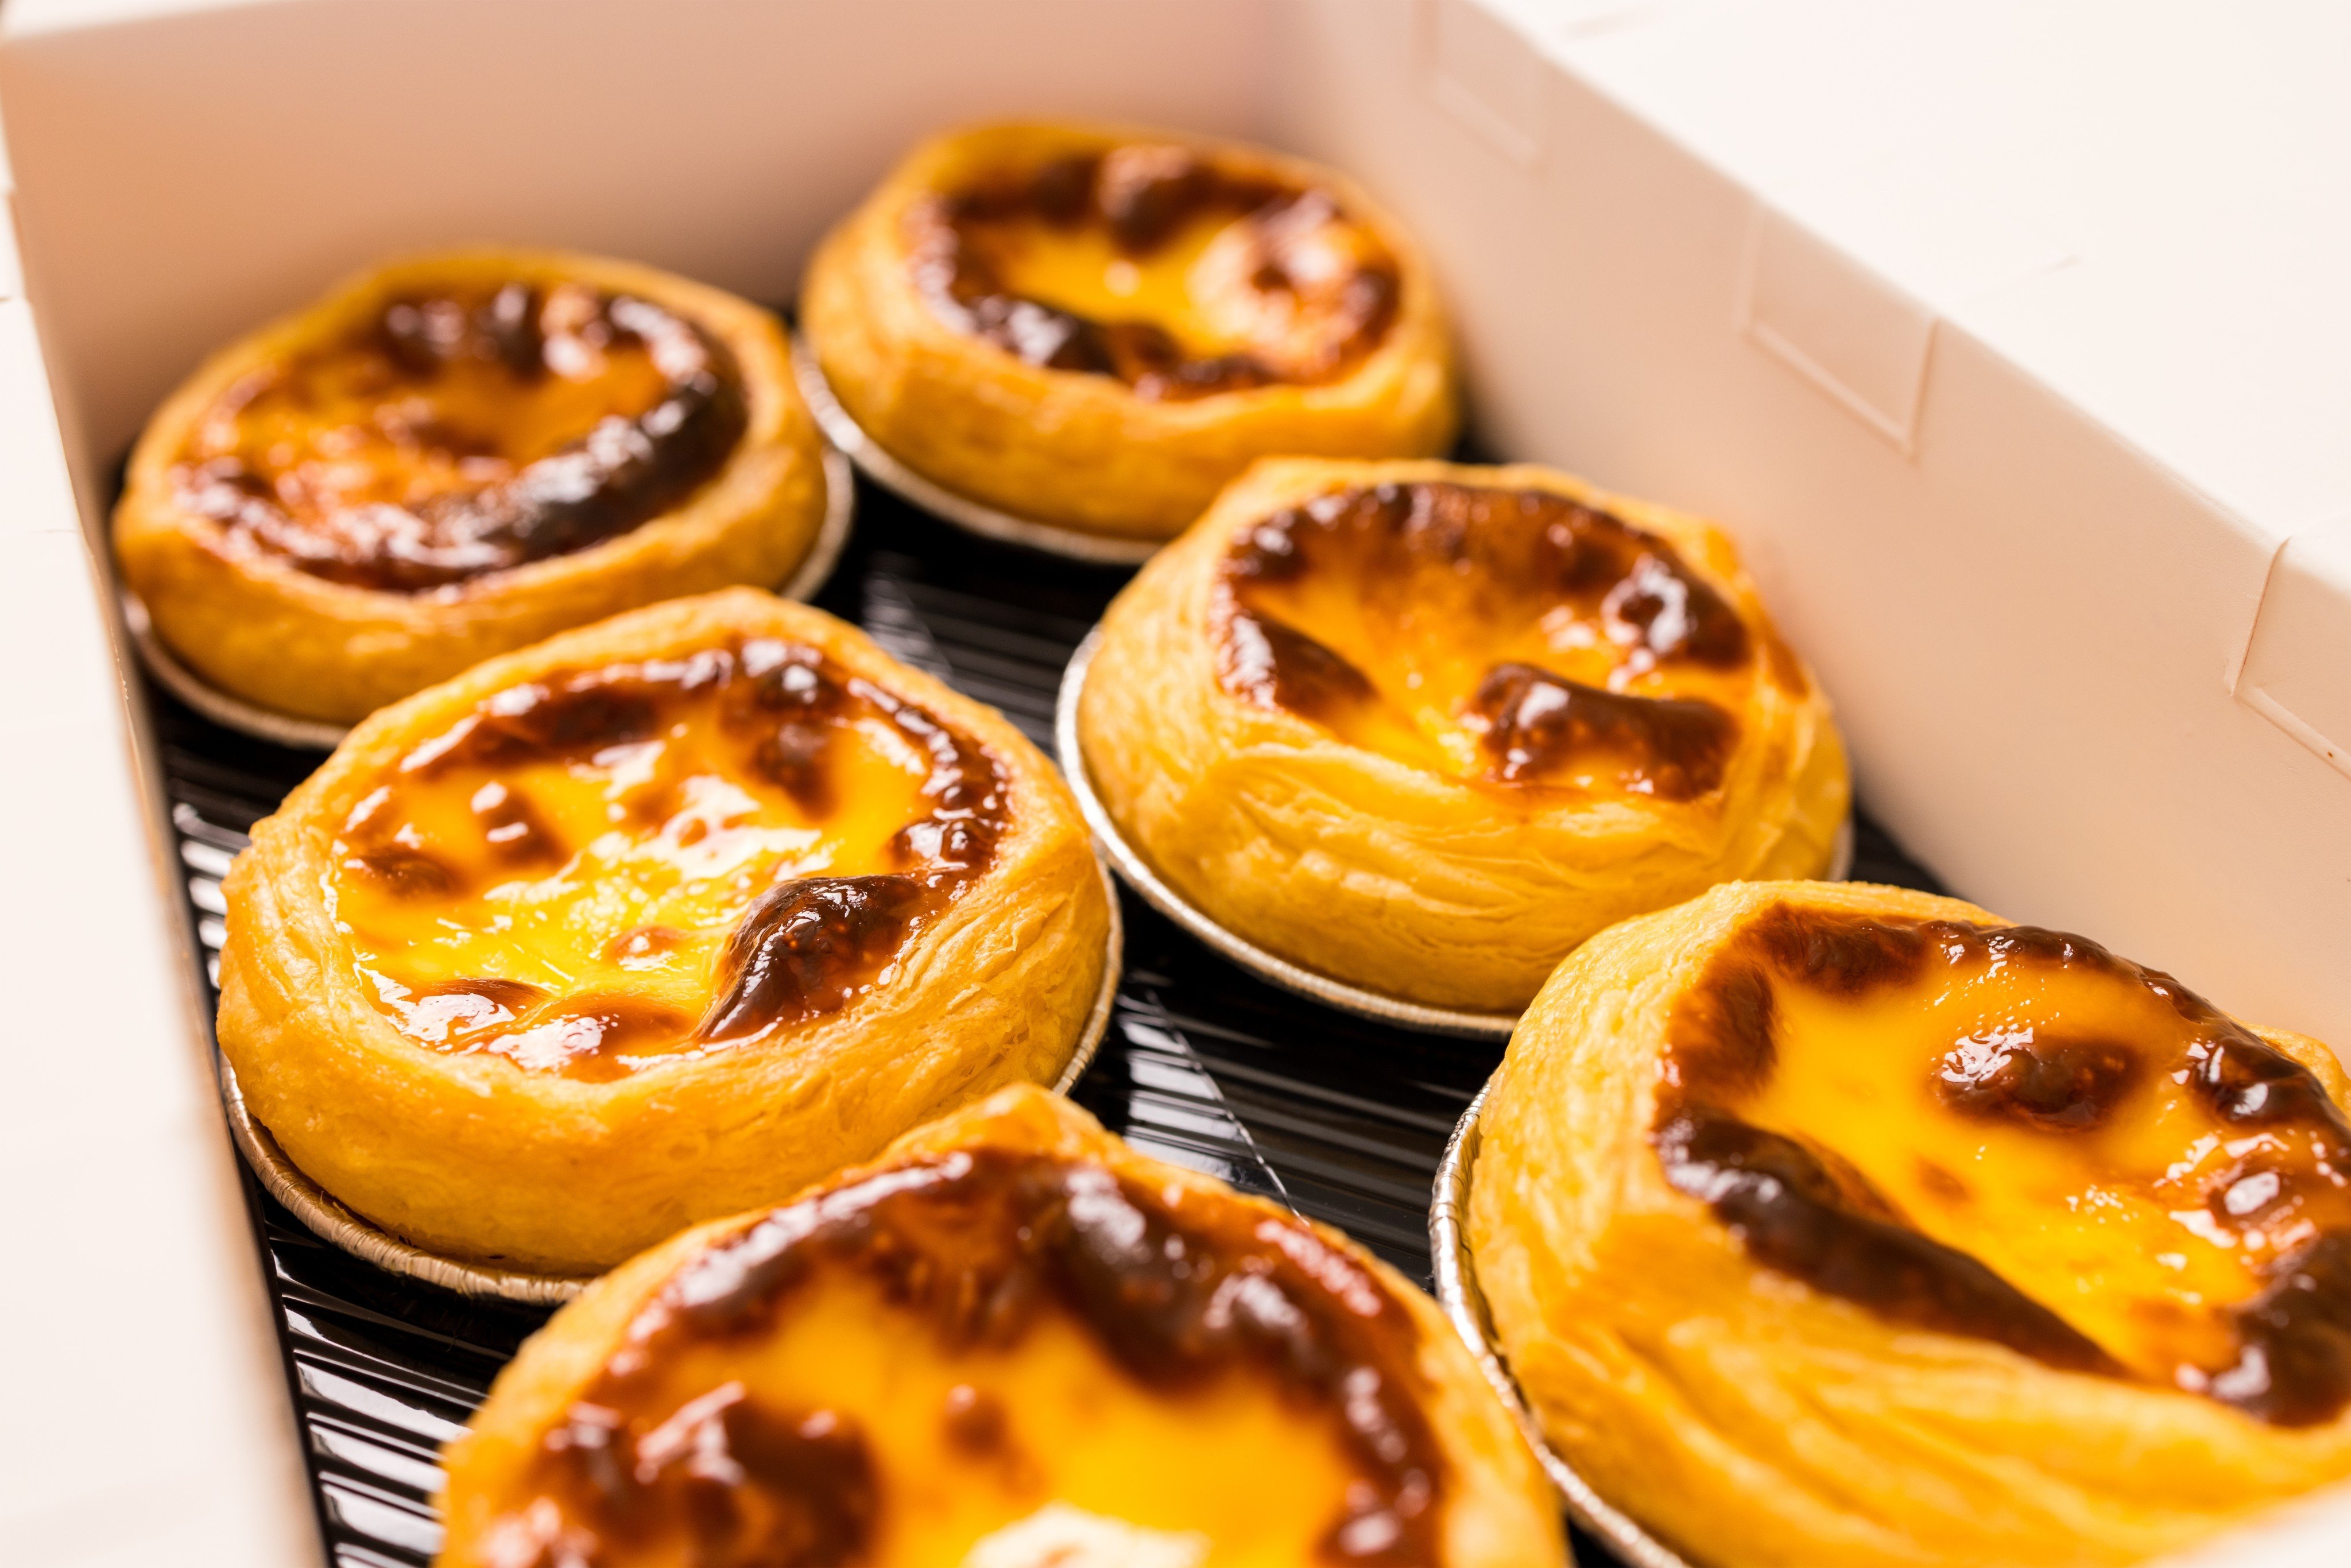 A social media post went viral on Wednesday, questioning whether it was proper for a ground crew member to eat the tarts. Photo: Shutterstock